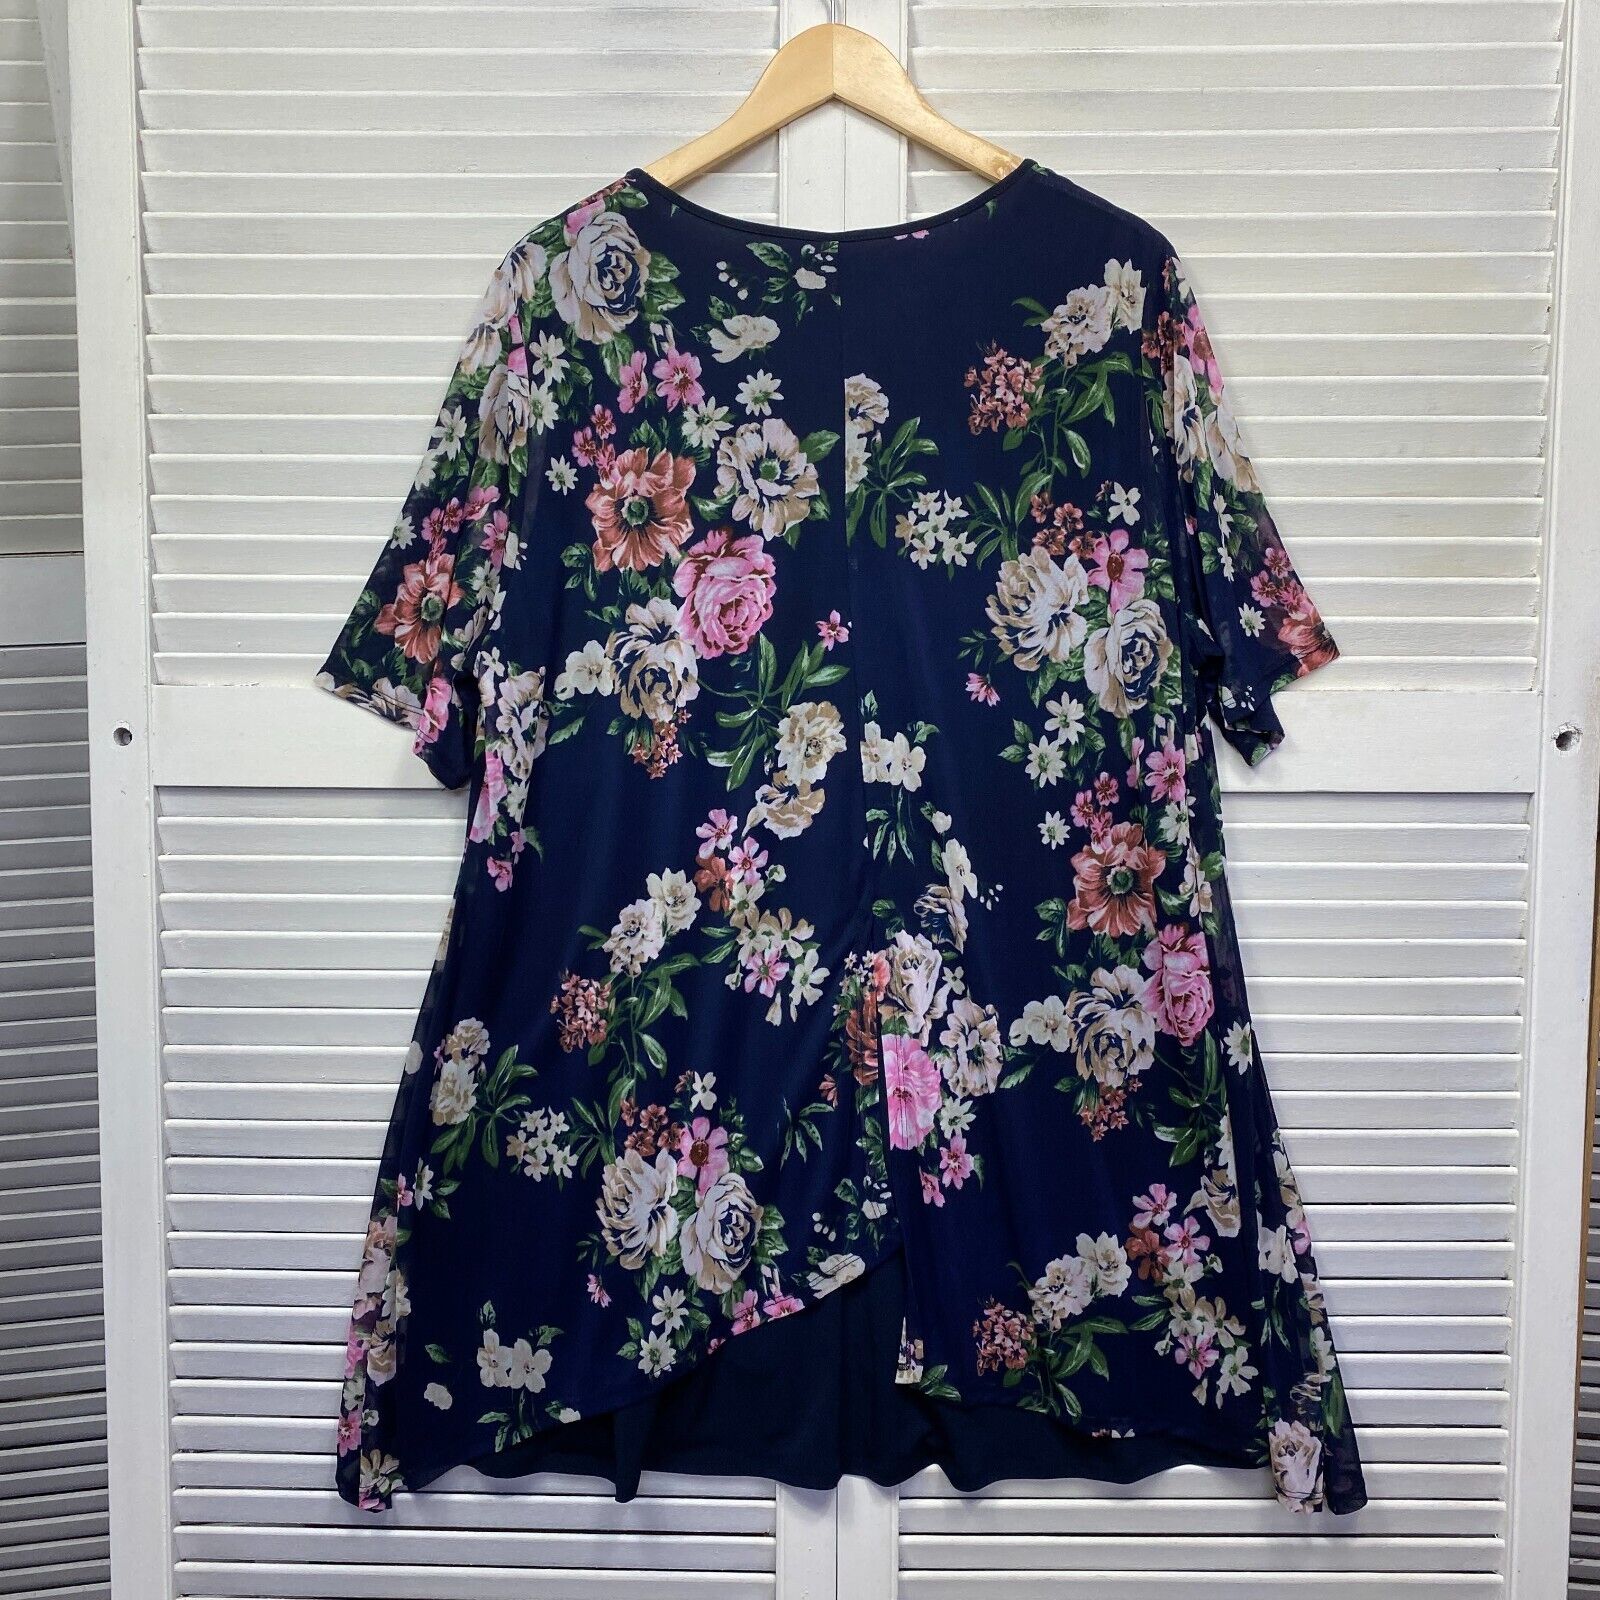 Shein Curve Top 2XL 16 18 Plus Floral Short Sleeve Preloved